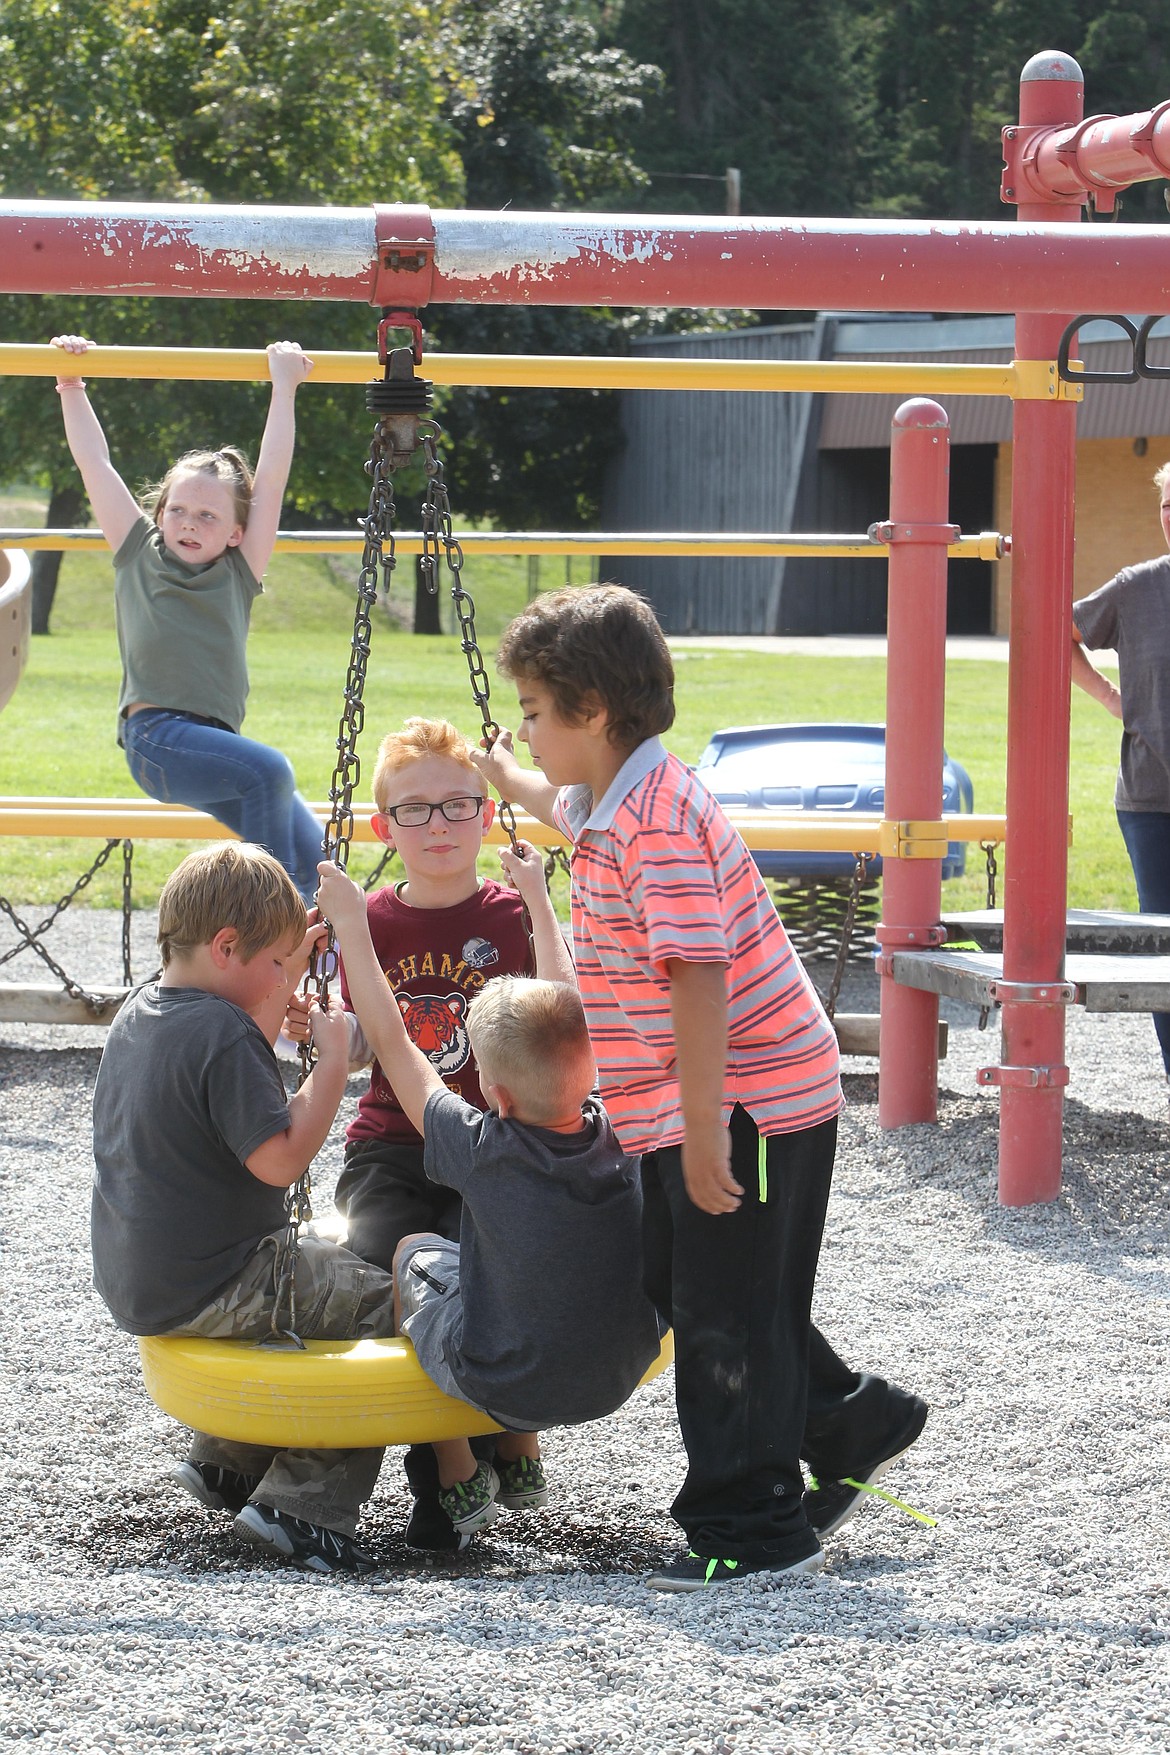 Libby Elementary School students play after their first day of classes on Aug. 25. (Will Langhorne/The Western News)